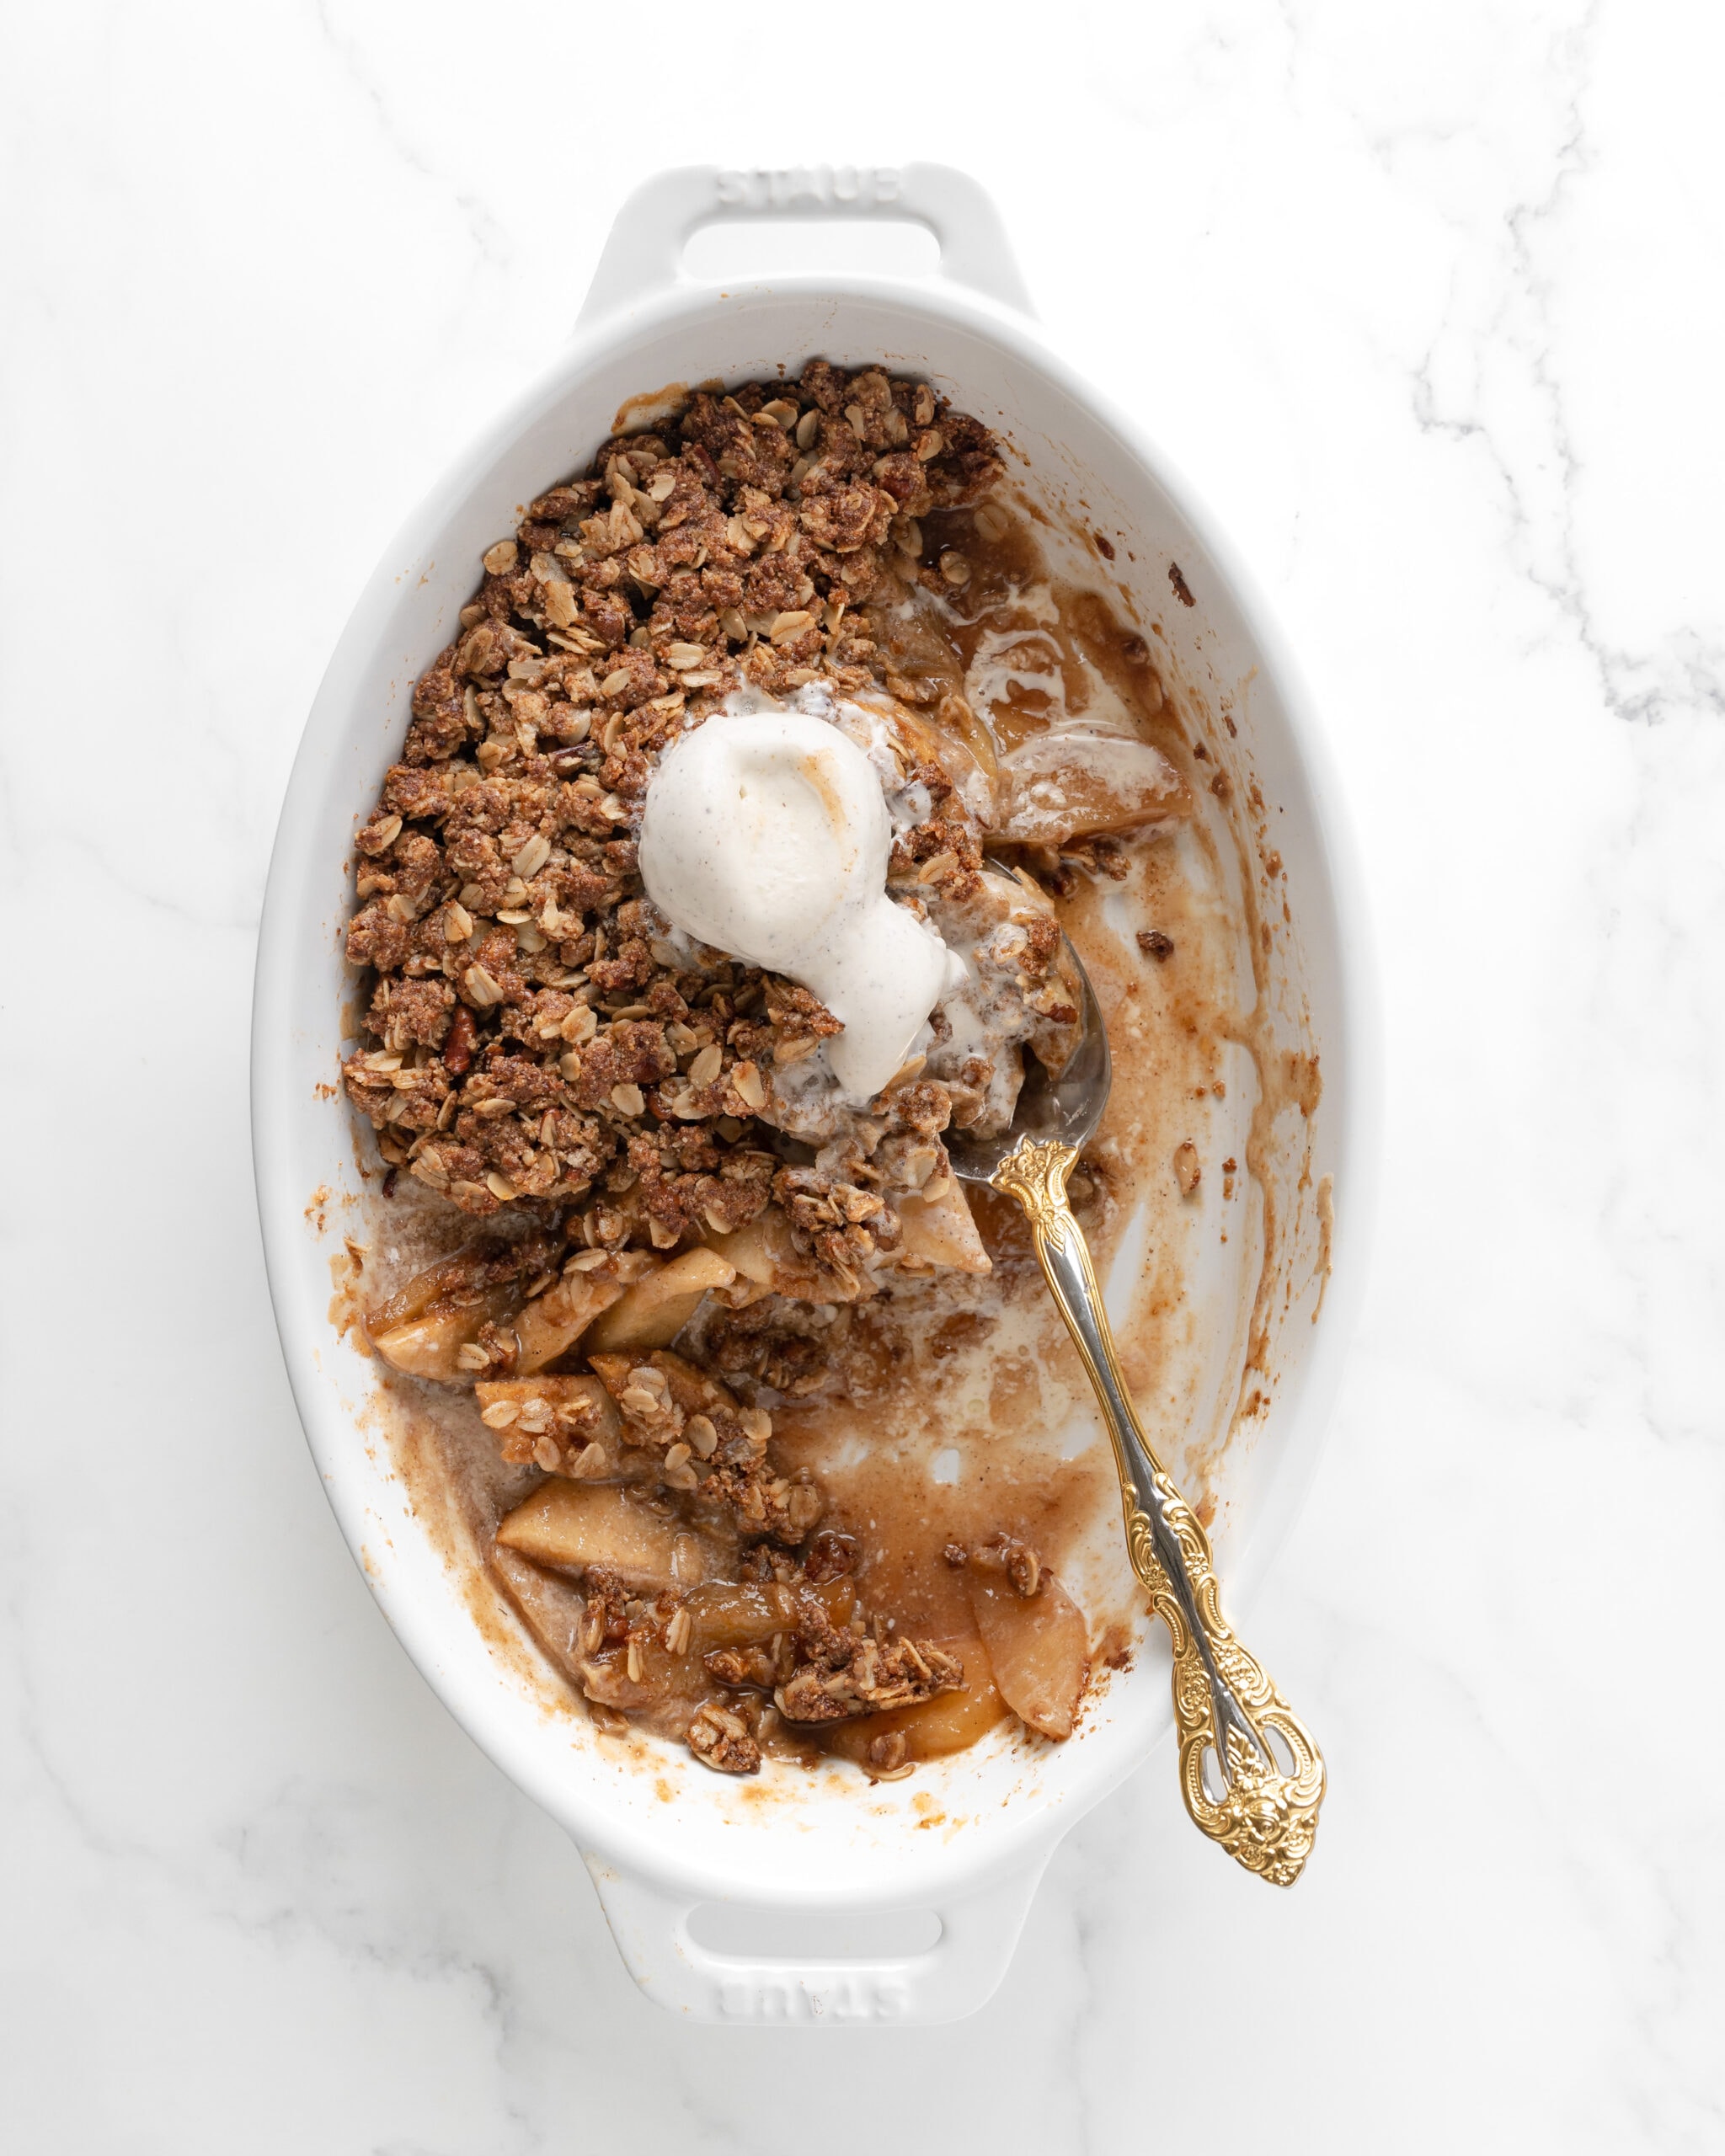 An oval baker with healthy apple crisp melted and half eaten with a spoon in the middle of the crisp.